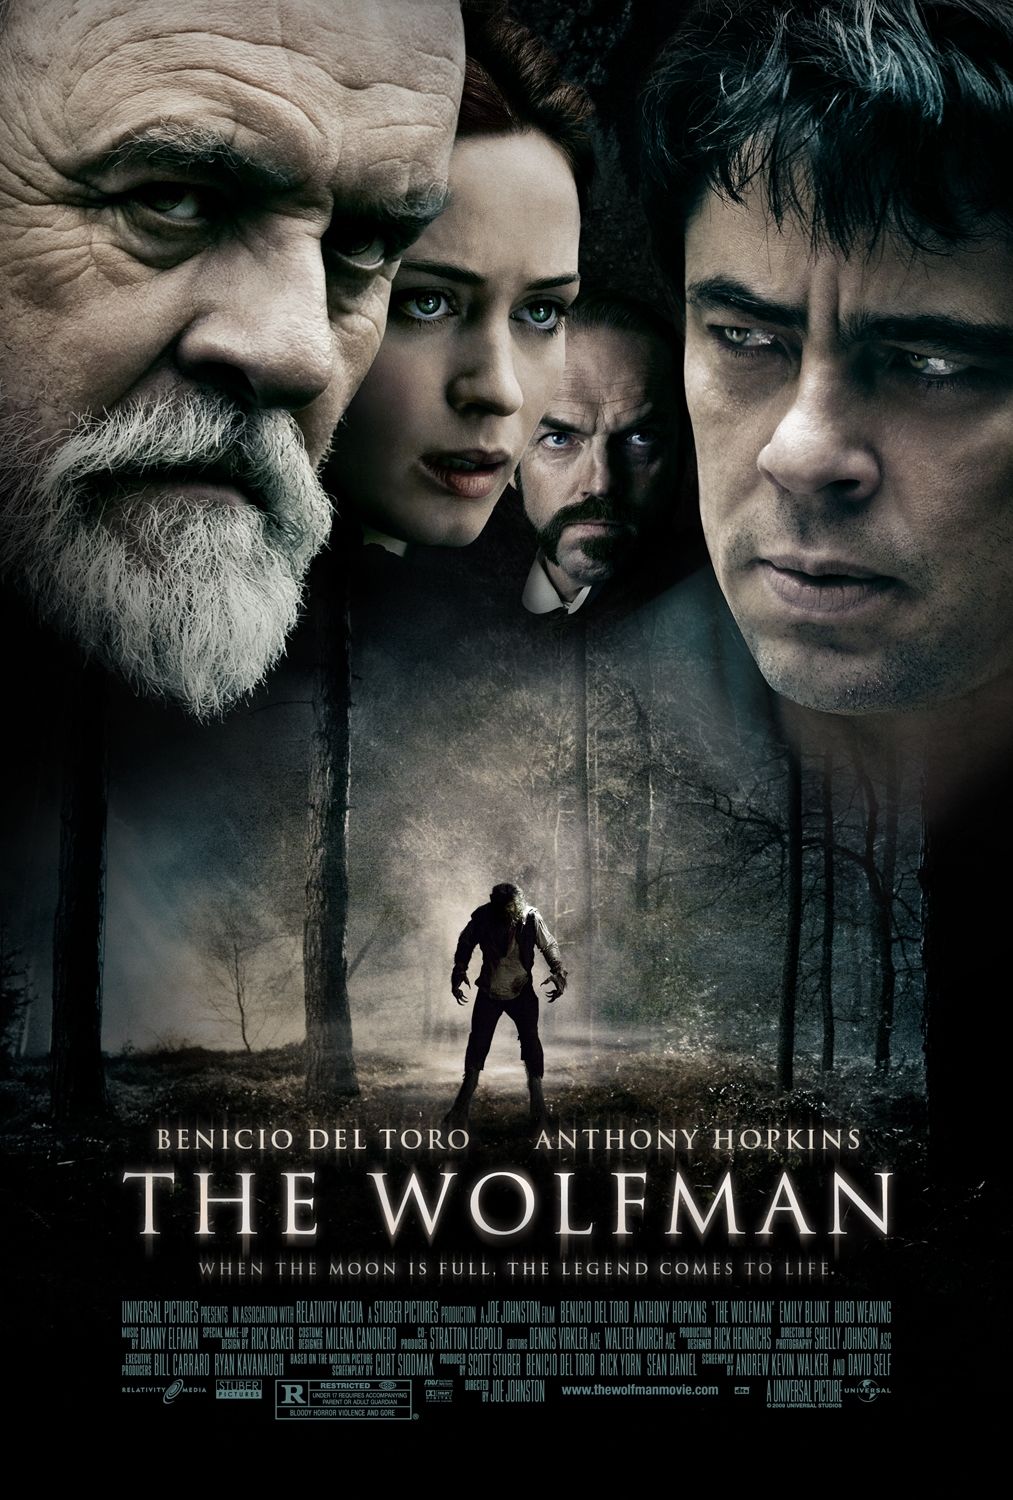 FULL MOVIE: The Wolfman (2010)